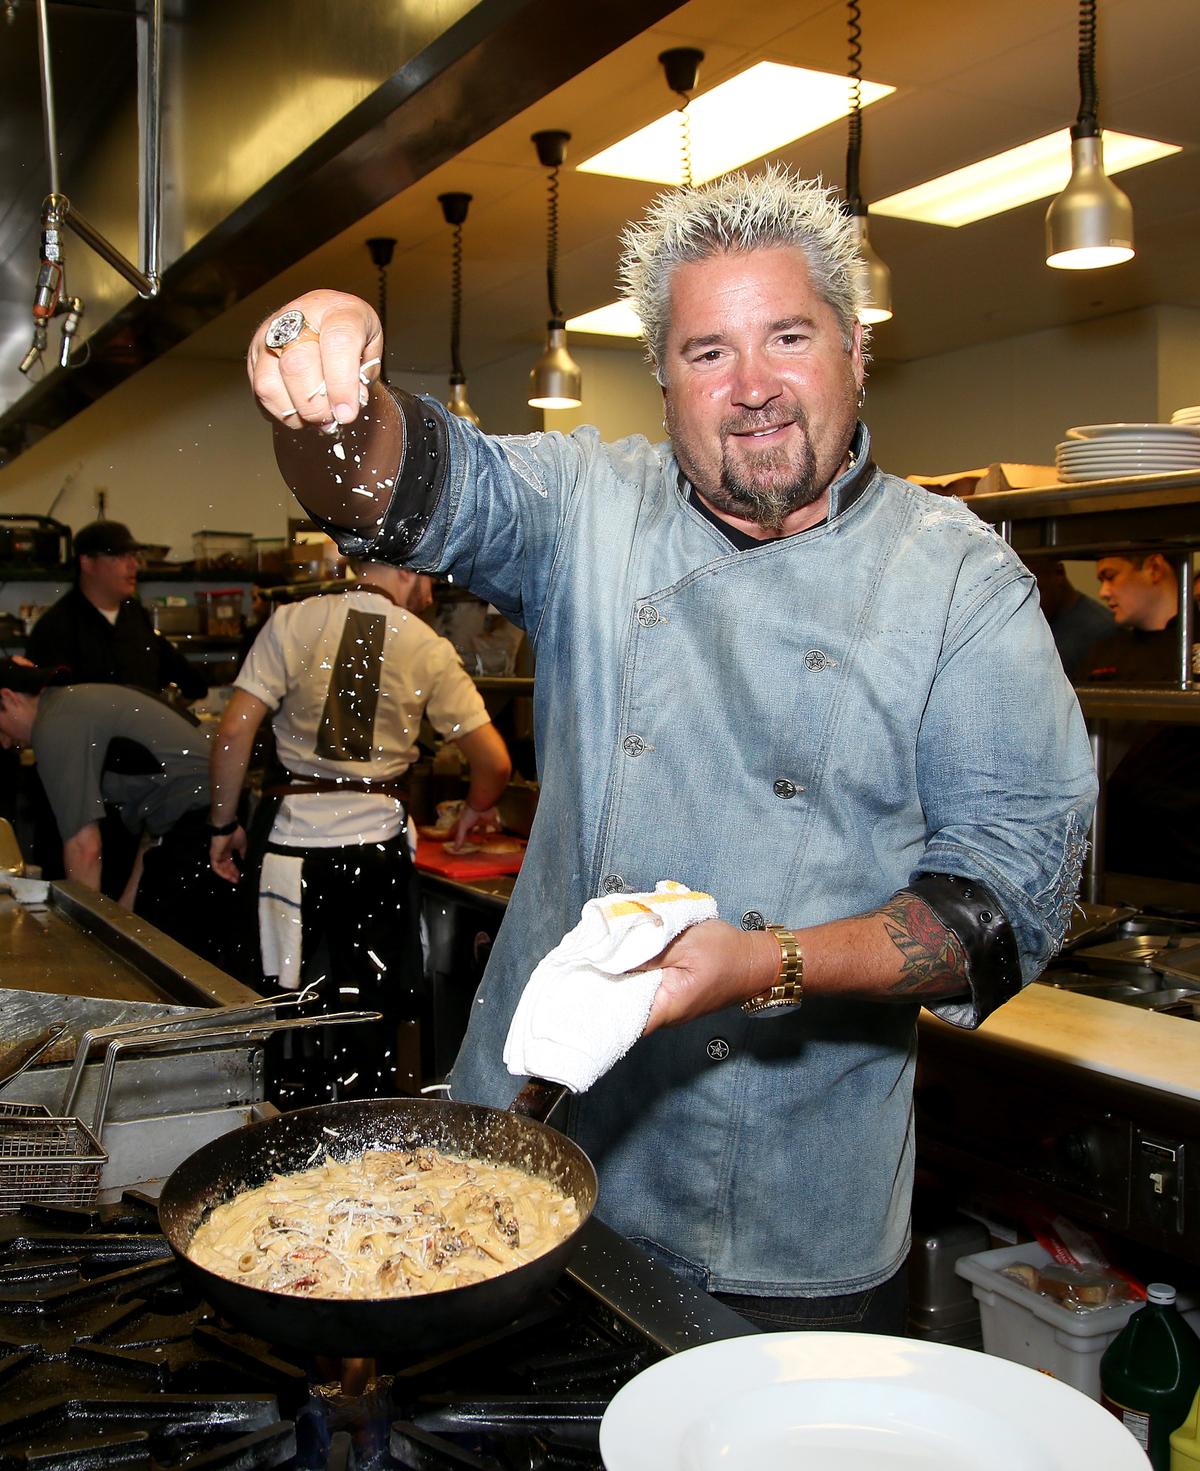 Fieri prepares a meal at his restaurant, Guy Fieri's Mt. Pocono Kitchen, during a meet and greet at Mount Airy Casino Resort in Mount Pocono, Pa., on July 30, 2016. (Paul Zimmerman/Getty Images)